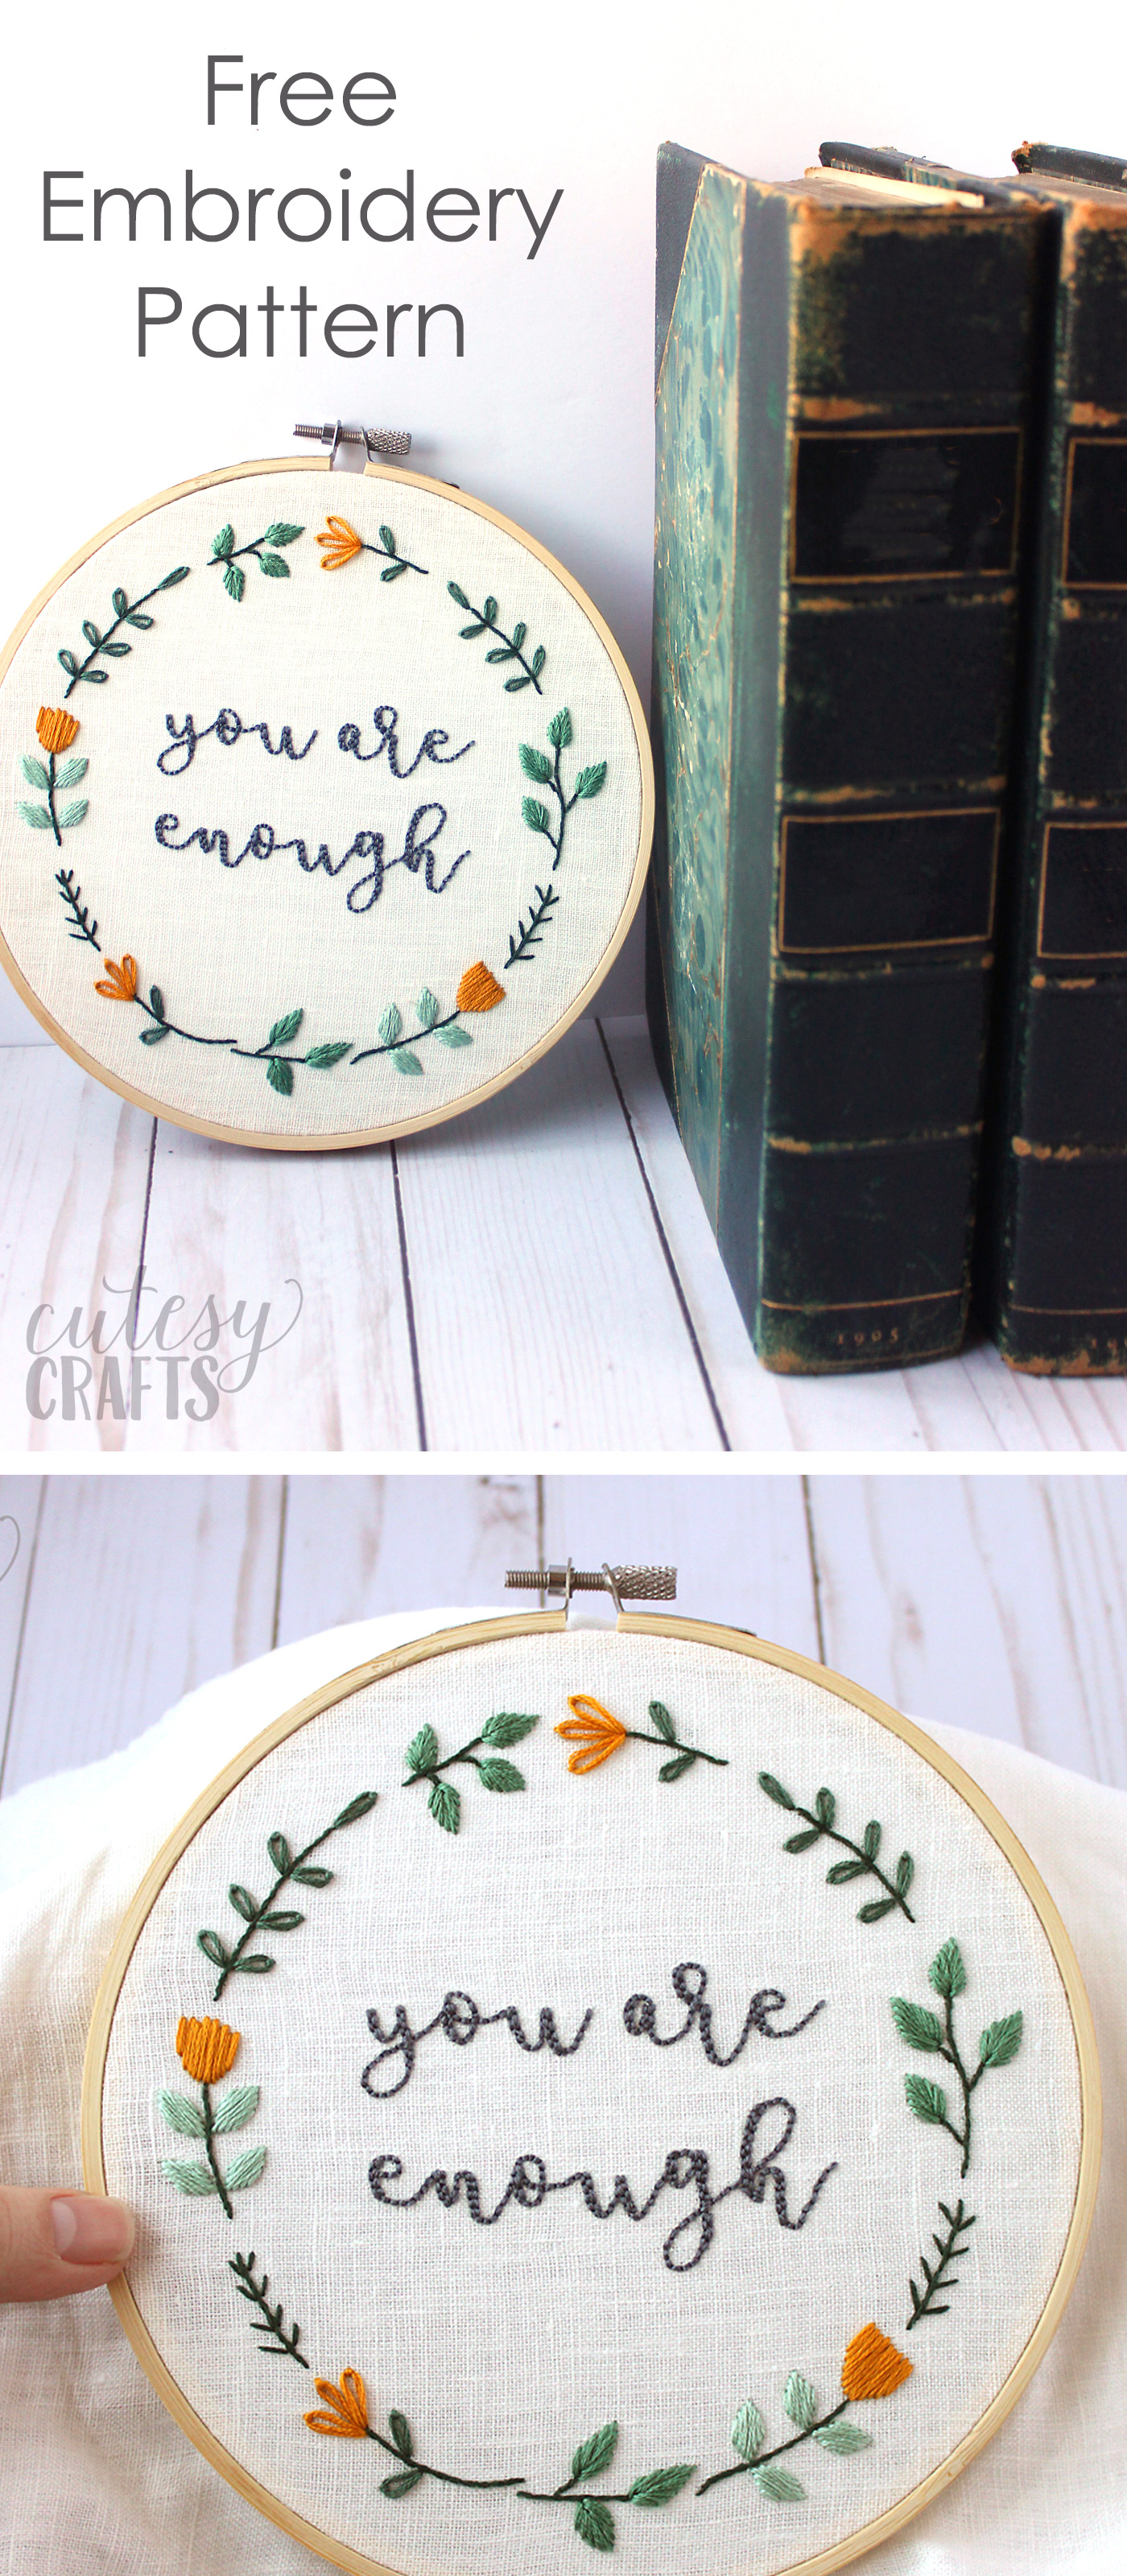 Free Hand Embroidery Pattern for an inspirational quote embroidery hoop - "you are enough" - #embroidery #handEmbroidery #embroiderystitches #embroiderypattern